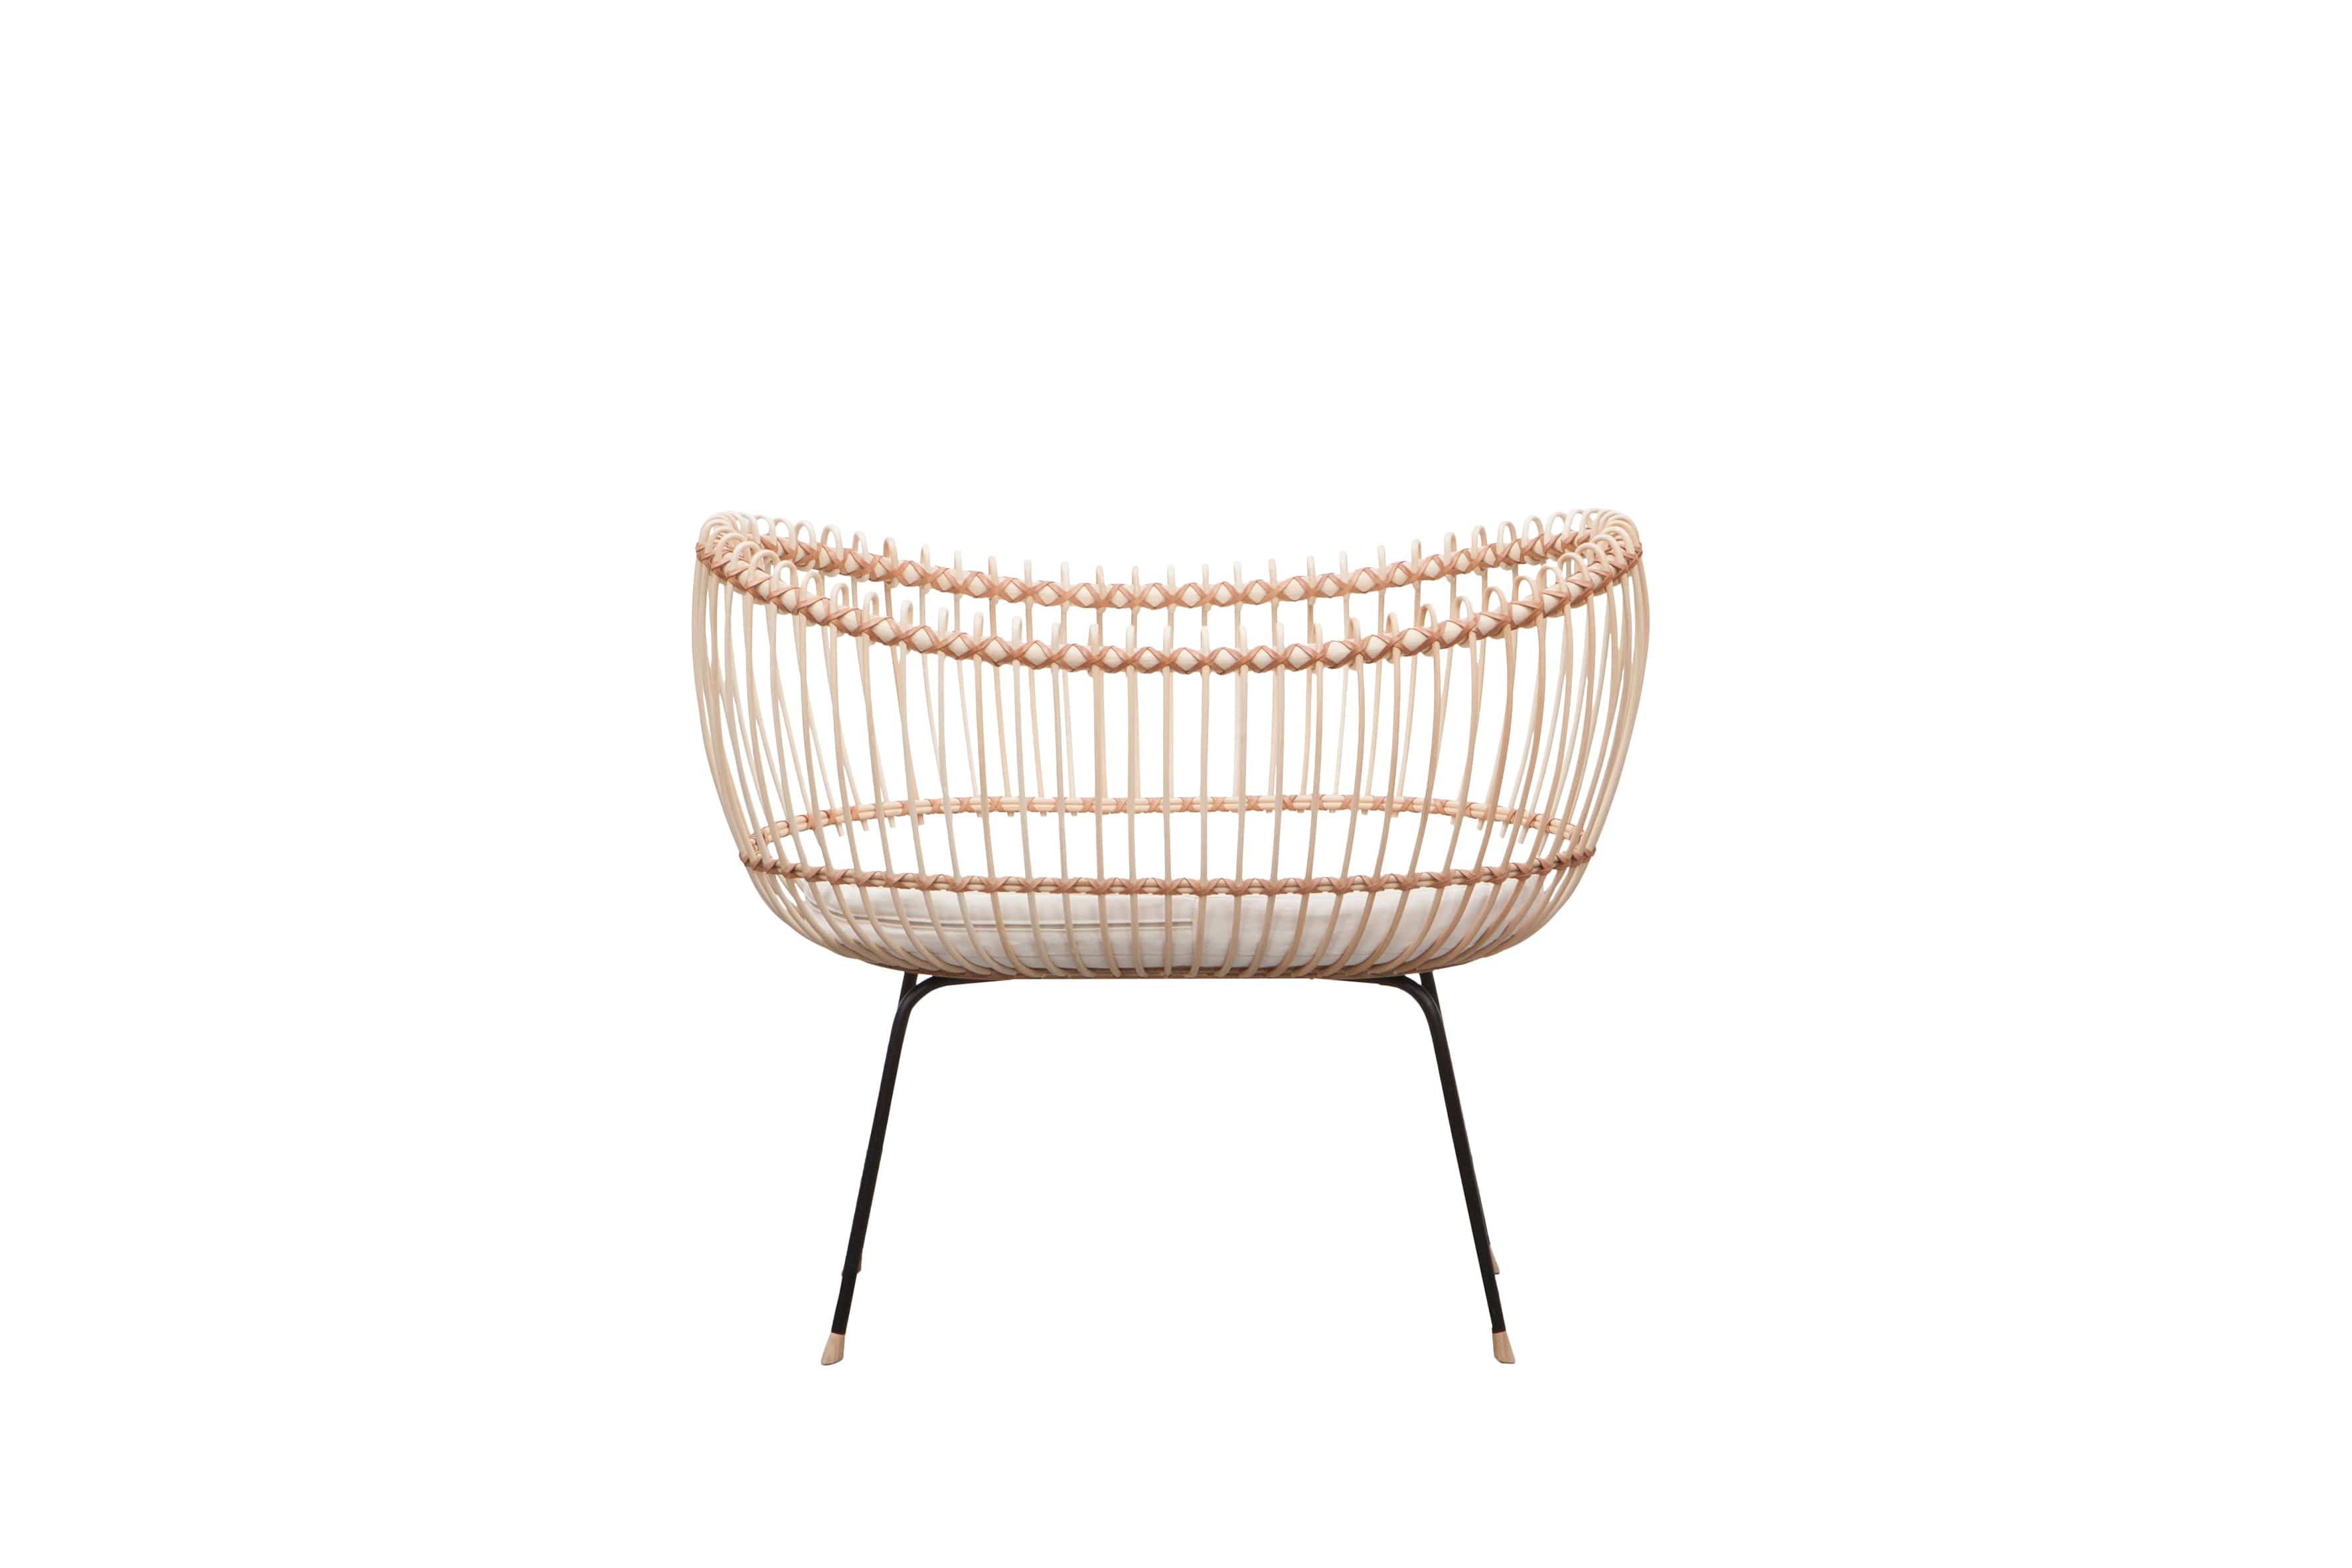 Round crib with outwards curved basket. Made of woven, light beige rattan beams, connected with light brown leather straps and standing on slim black metal legs. 